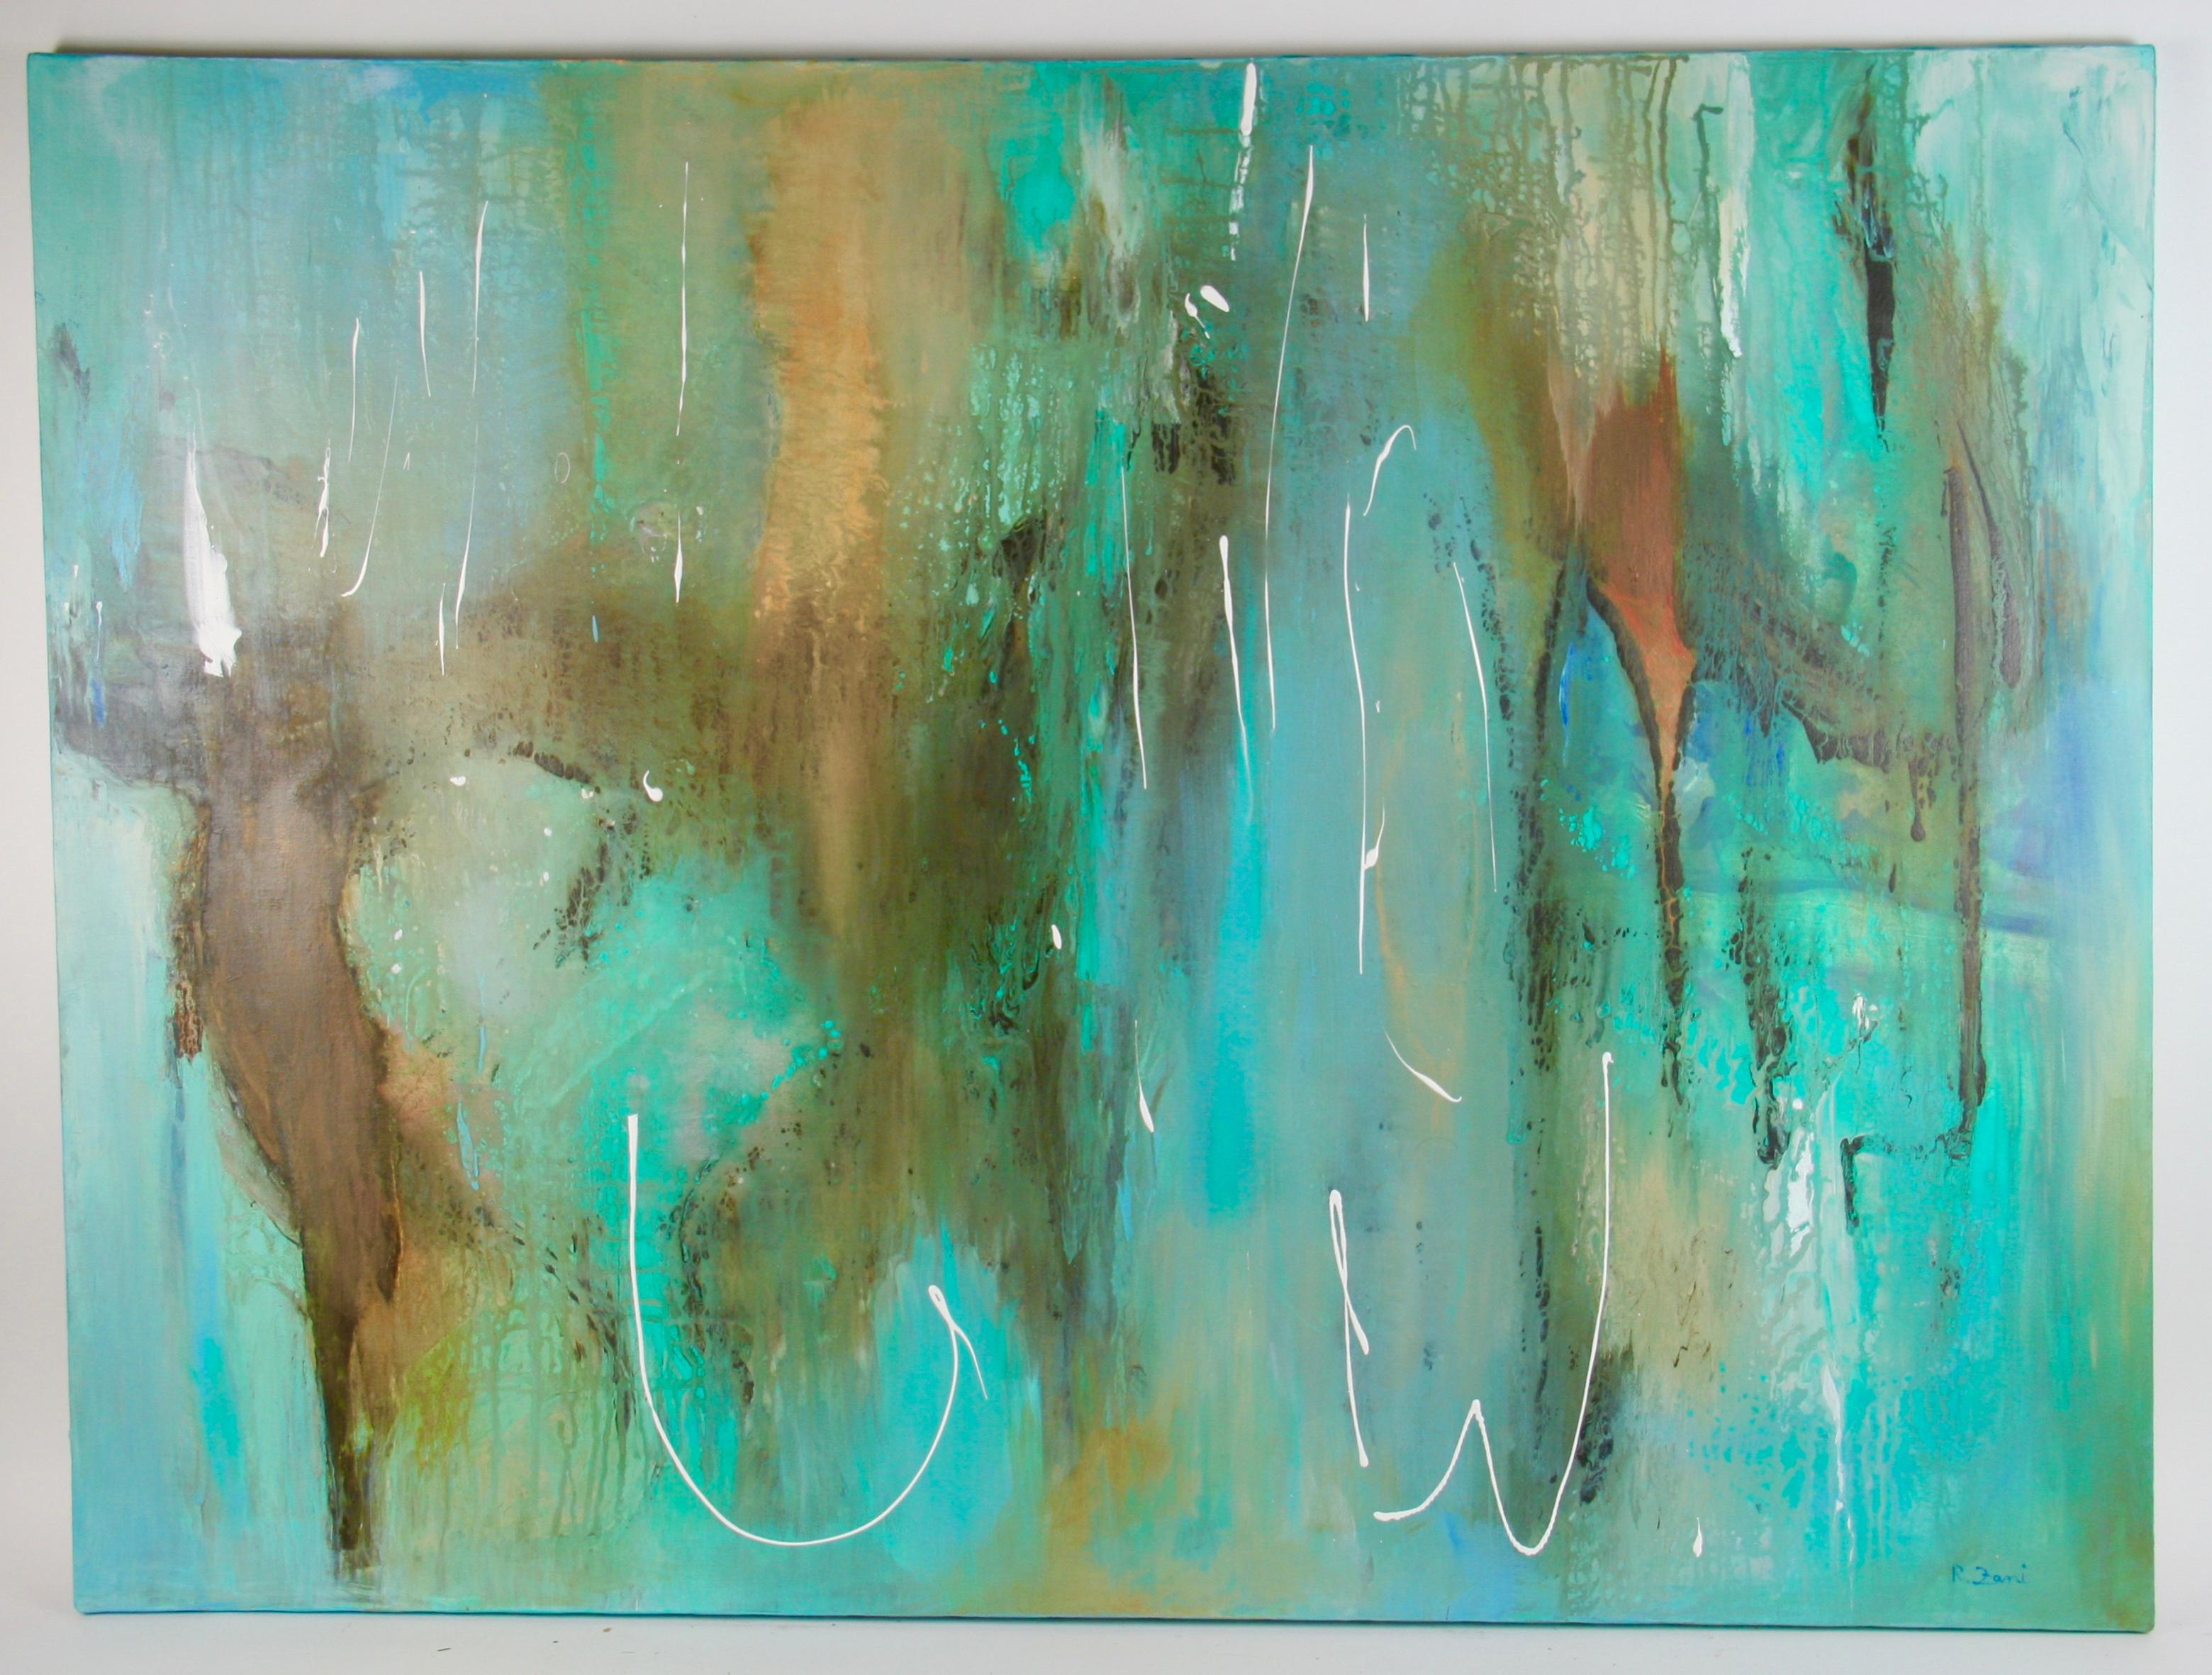 #5-3134 Large scale Acquamarine abstract painting ,acrylic on canvas signed by R.Zani lower right.Unframed.